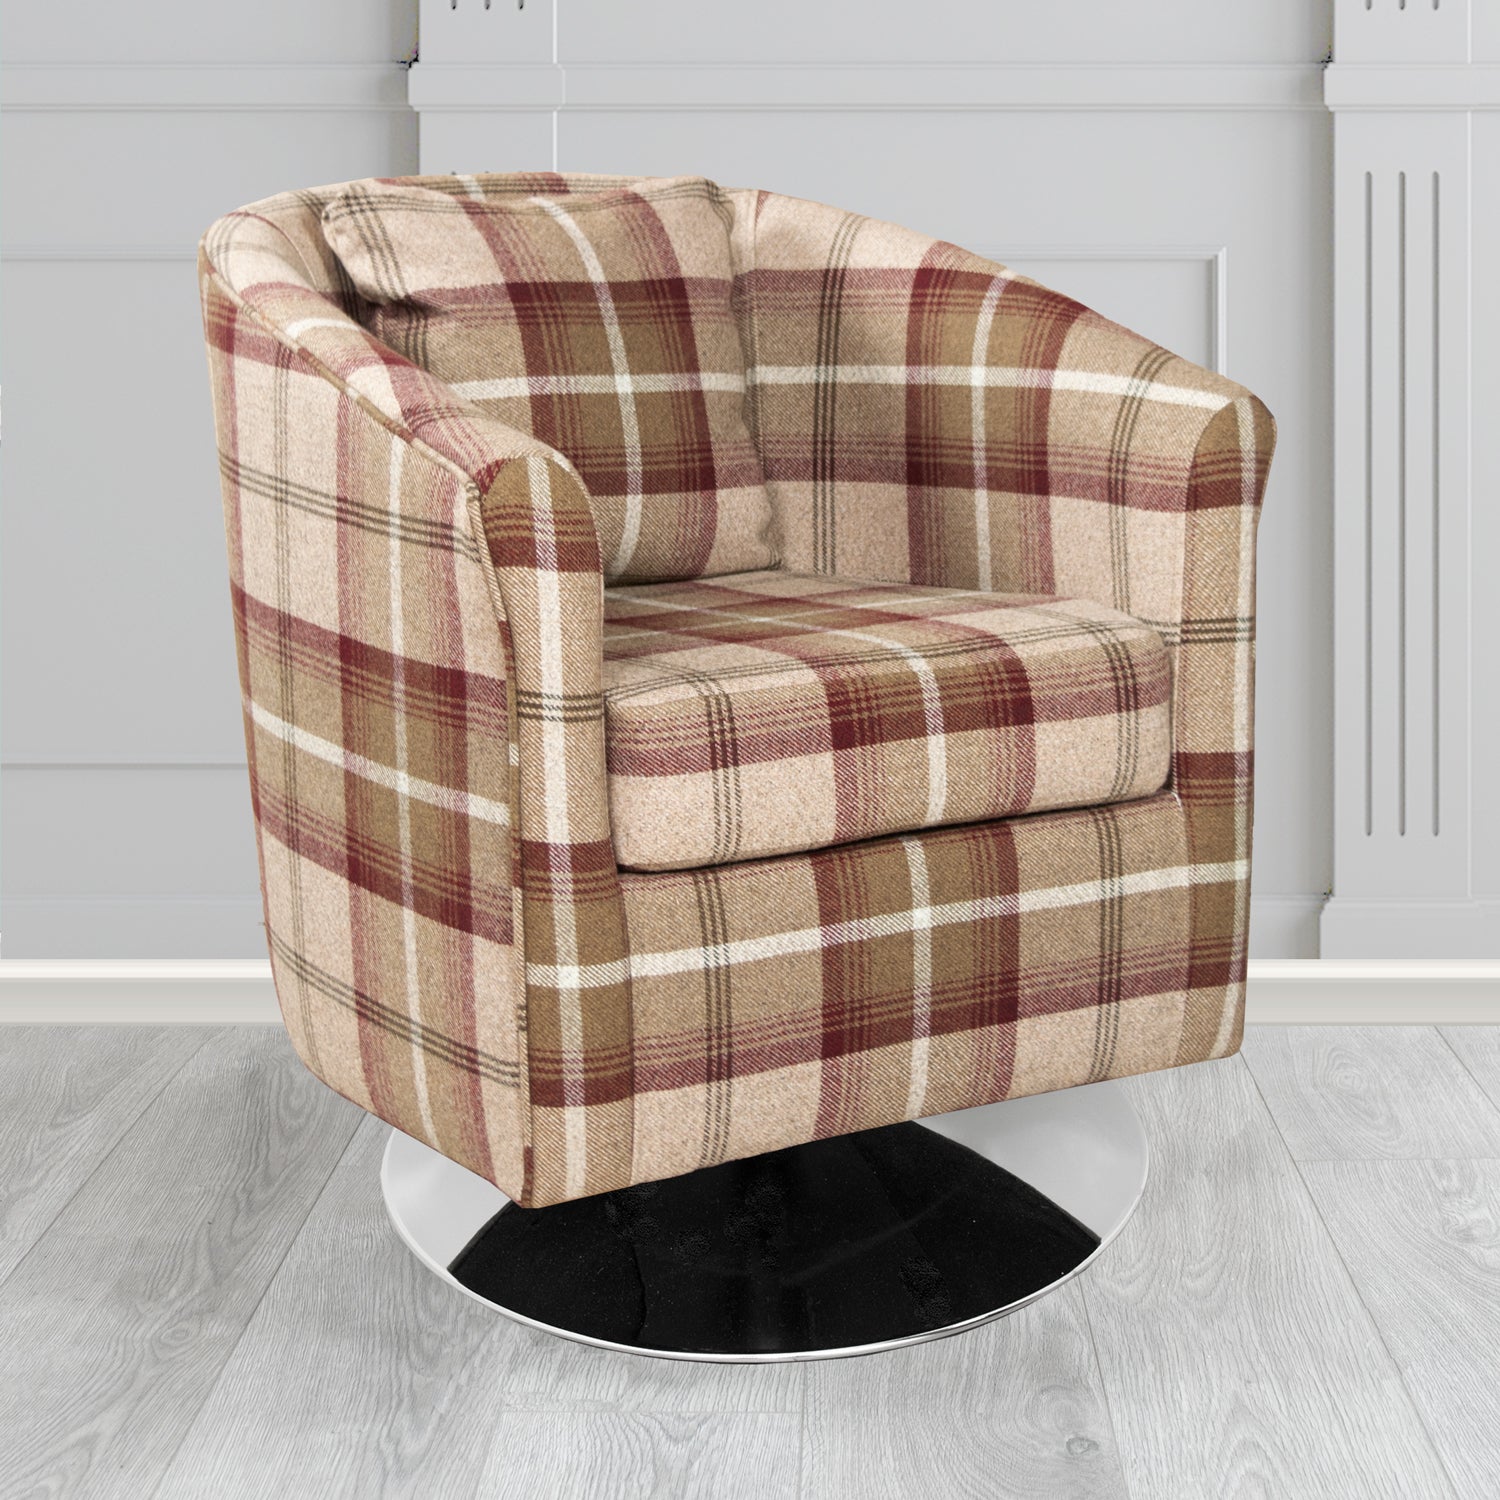 St Tropez Balmoral Mulberry Tartan Fabric Swivel Tub Chair with Scatter Cushion - The Tub Chair Shop